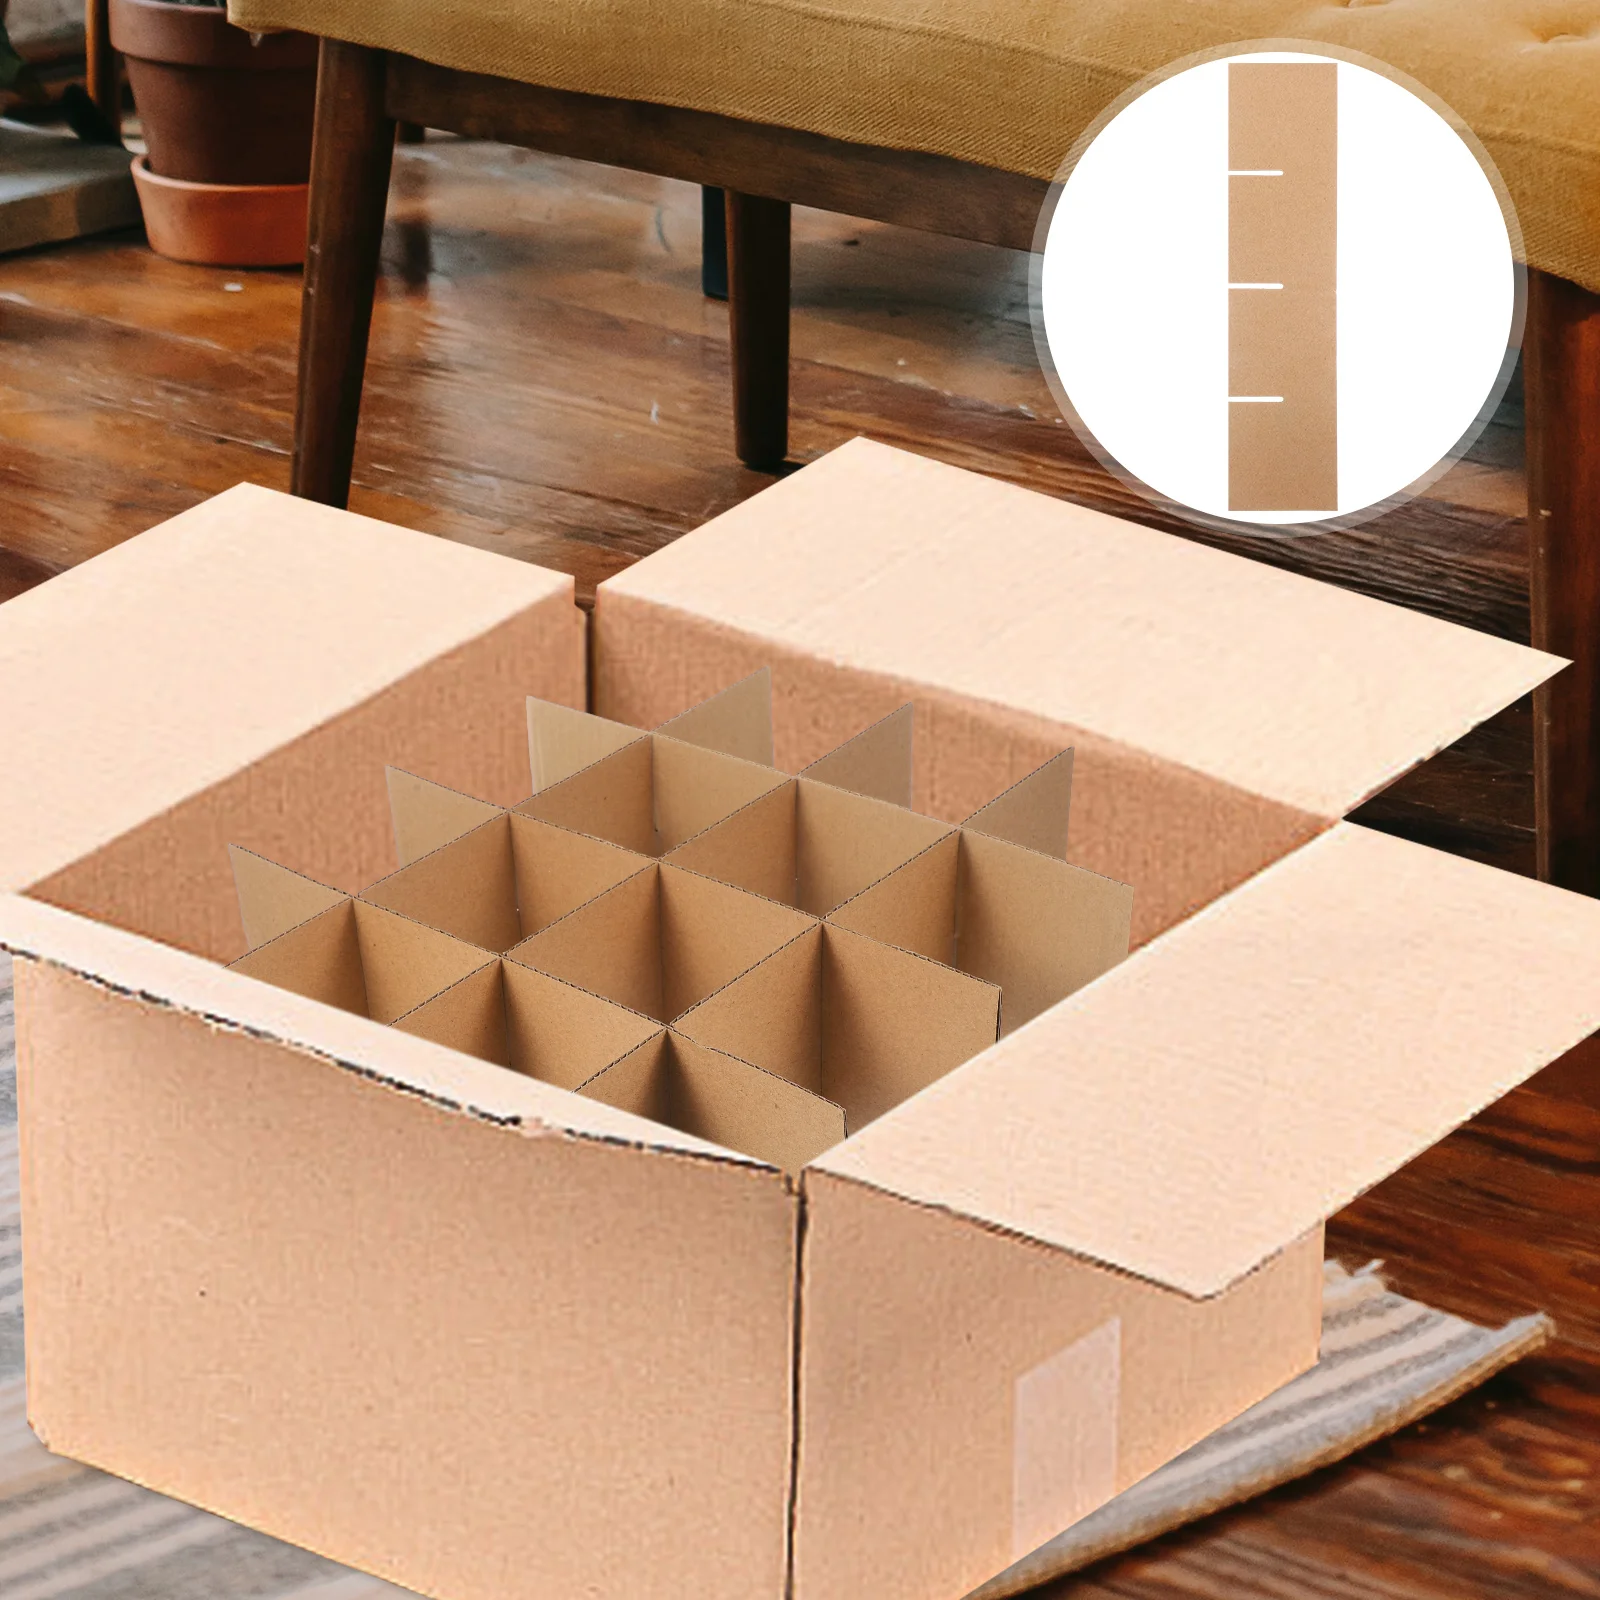 

Cardboard Moving Box Dividers Cardboard Boxes Glass Dividers Dish Cardboard Dividers For Moving Partition Glass Plate